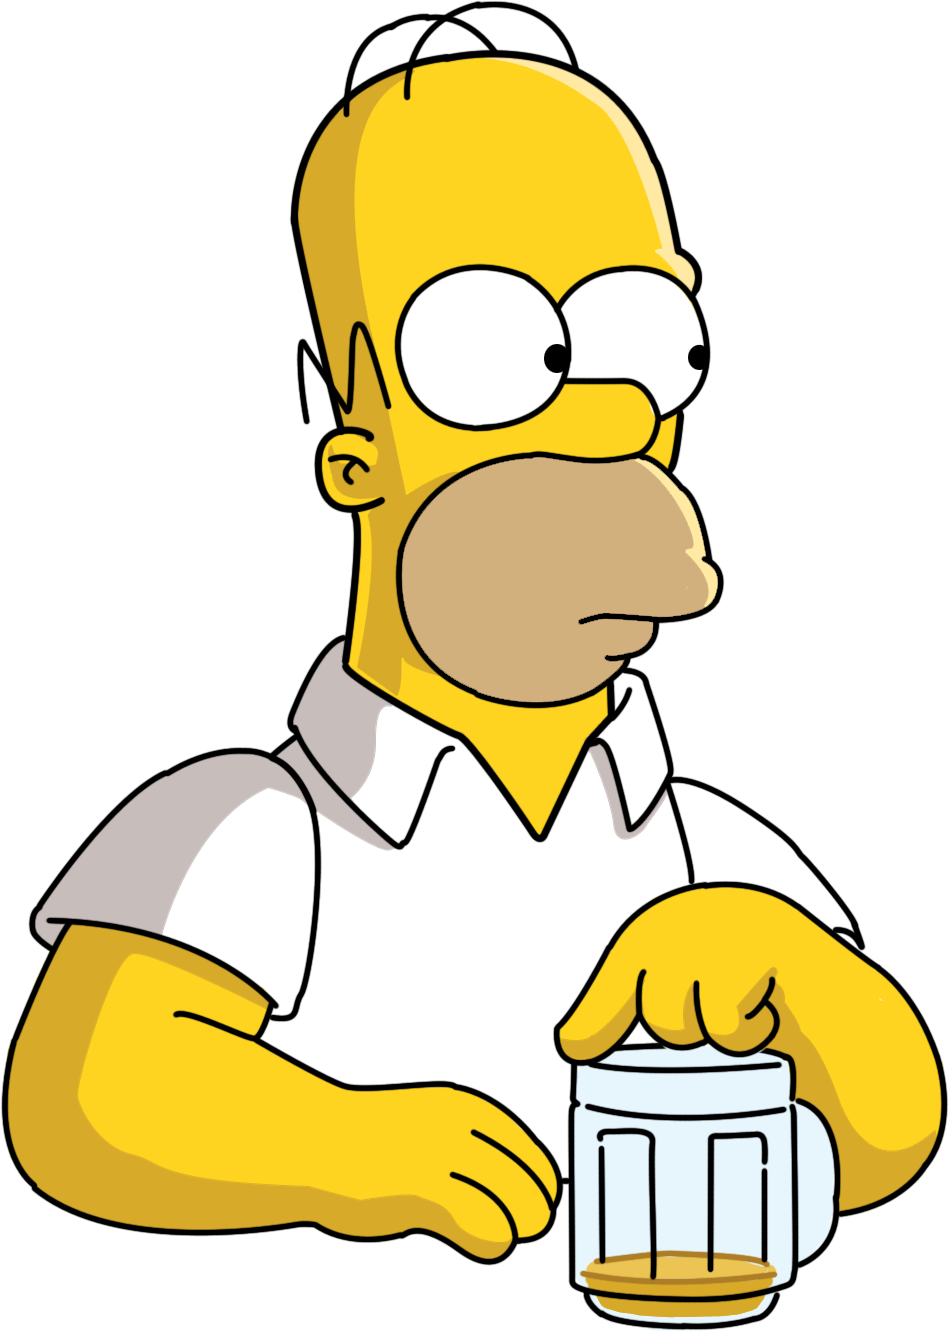 /upload/clipart/simpsons/Homer_Simpson_Vector_by_bark2008.png